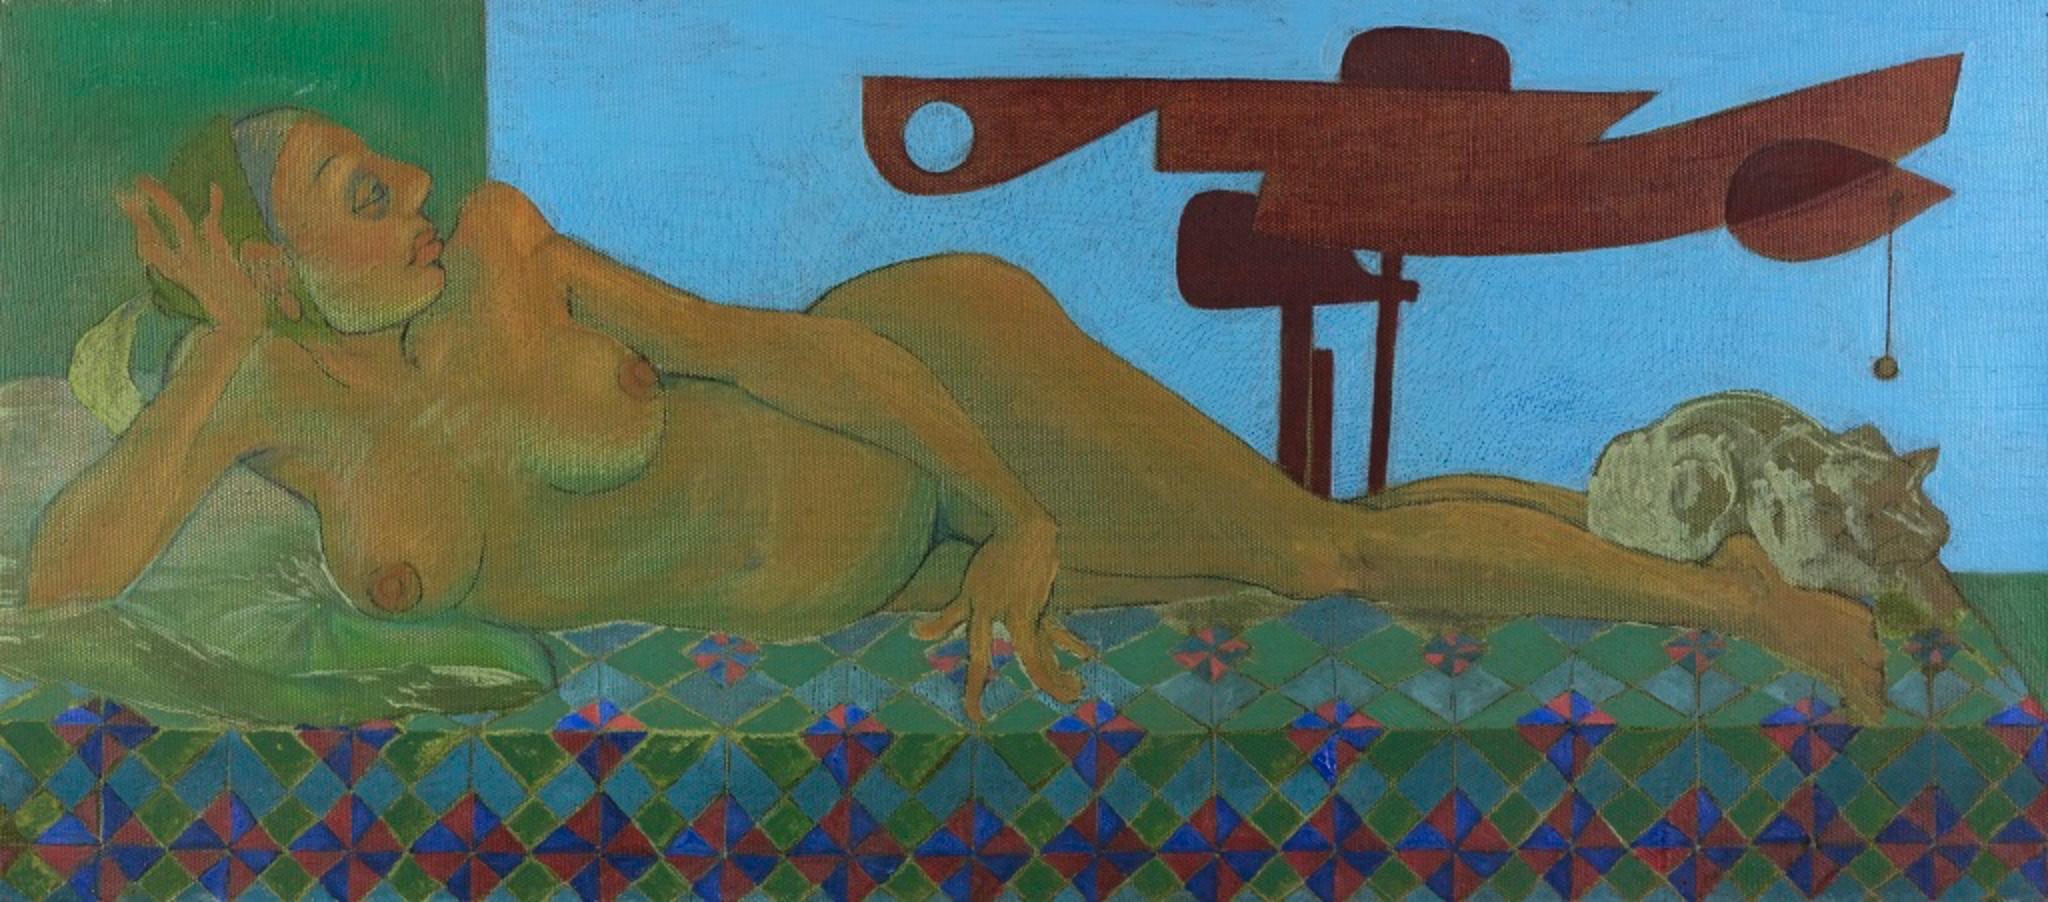 Lying Nude with Signals 1 (Original Title: Nudo disteso con segnali 1) is an original Contemporary artwork realized in 1988 by the italian Contemporary artist Leo Guida (1992 - 2017).

Original Oil on Canvas. 

Total Dimensions: cm 30 x 70.

Mint